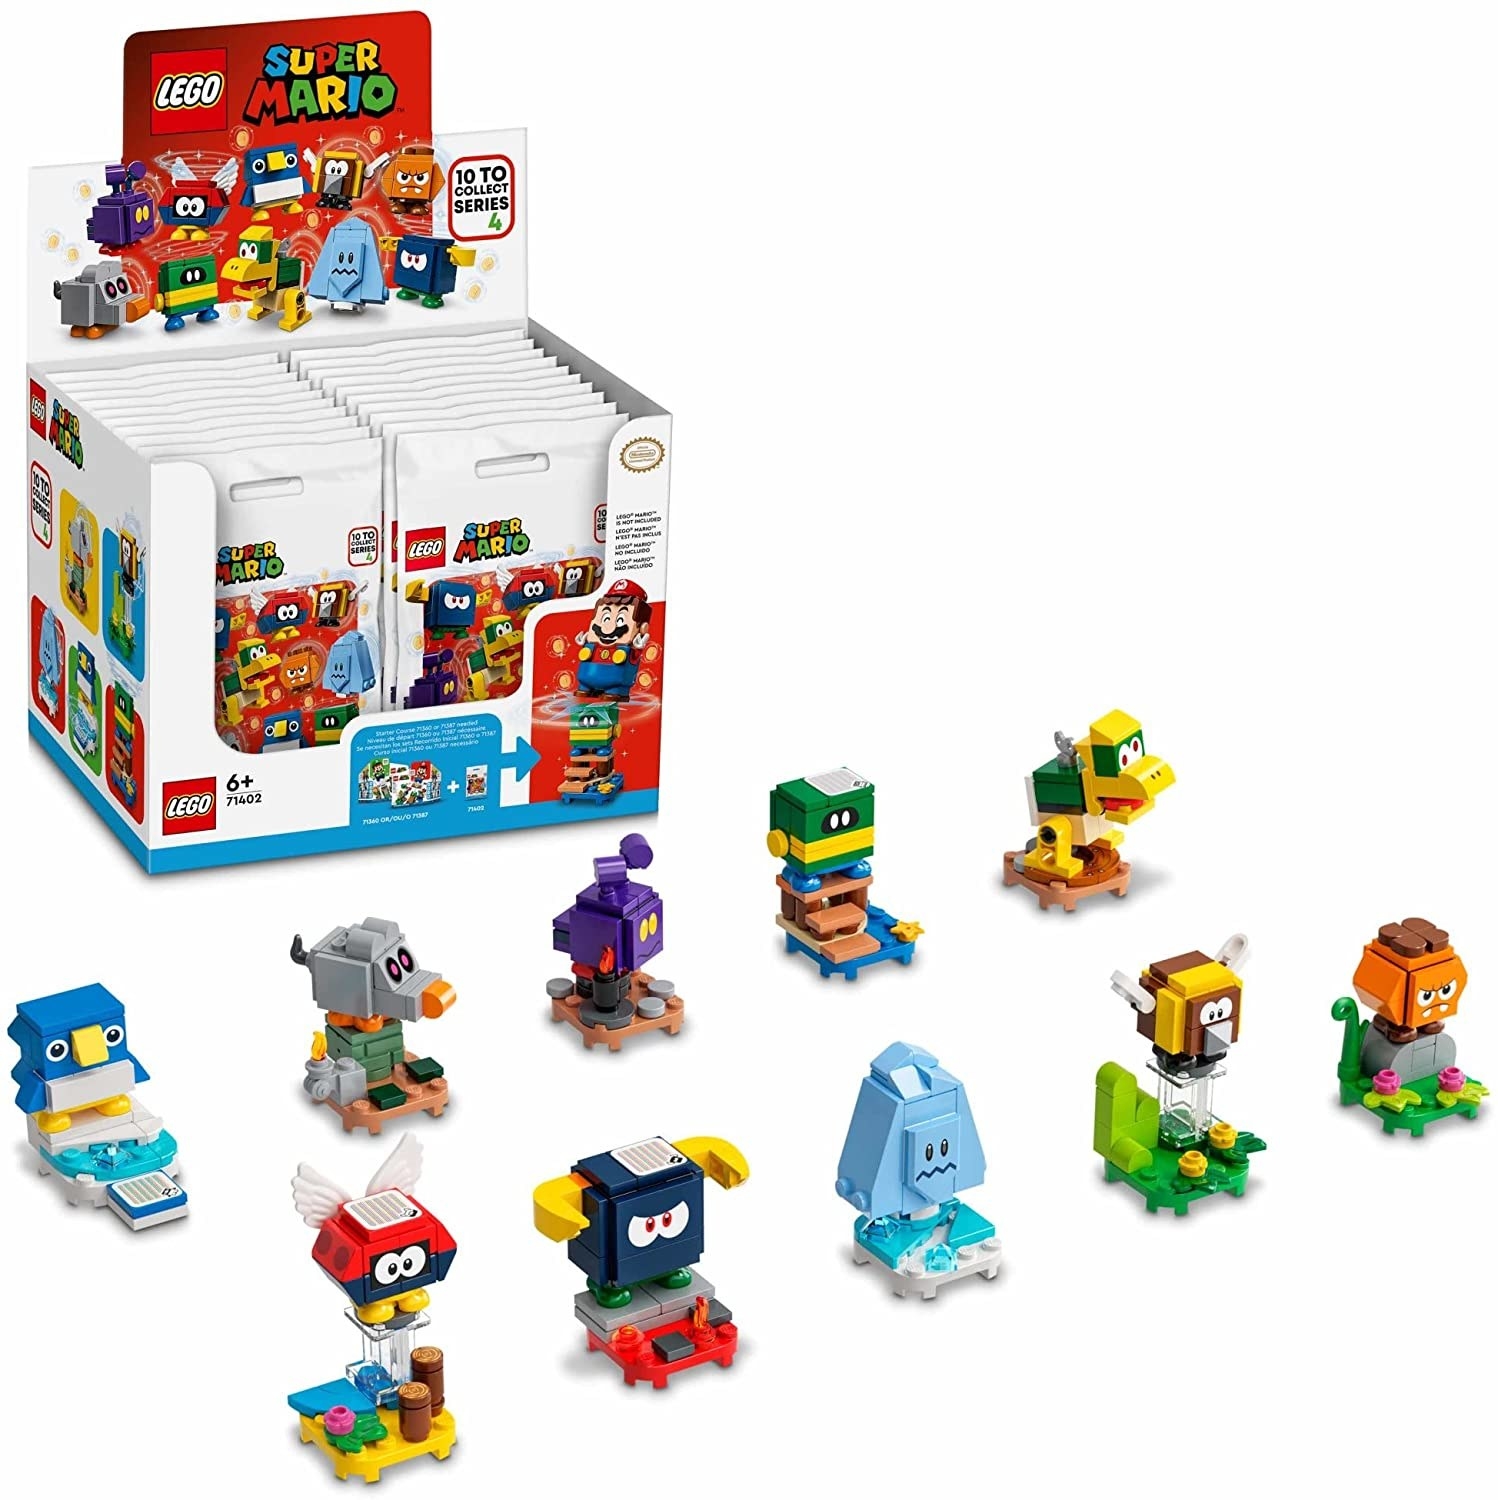 A bunch of Lego Super Mario characters in a row